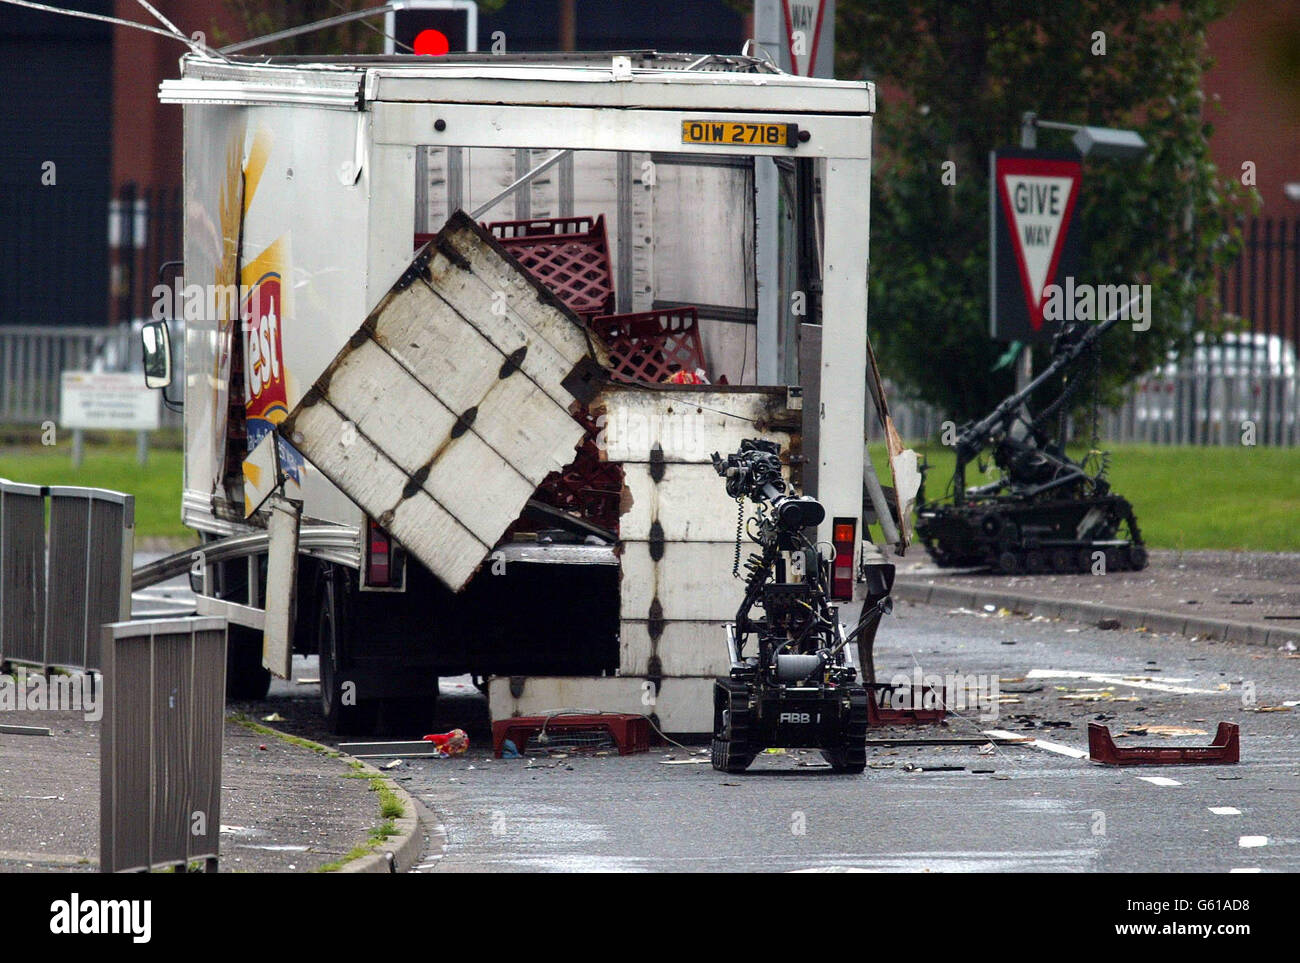 British Army robots carry out controlled explosions on a bread van in Belfast city centre, Northern Ireland. *The suspect device caused massive traffic problems, the security forces moved on the van at midday after it was abandoned in what is thought to be a suspect bomb by dissident Irish Republican terrorists. Stock Photo